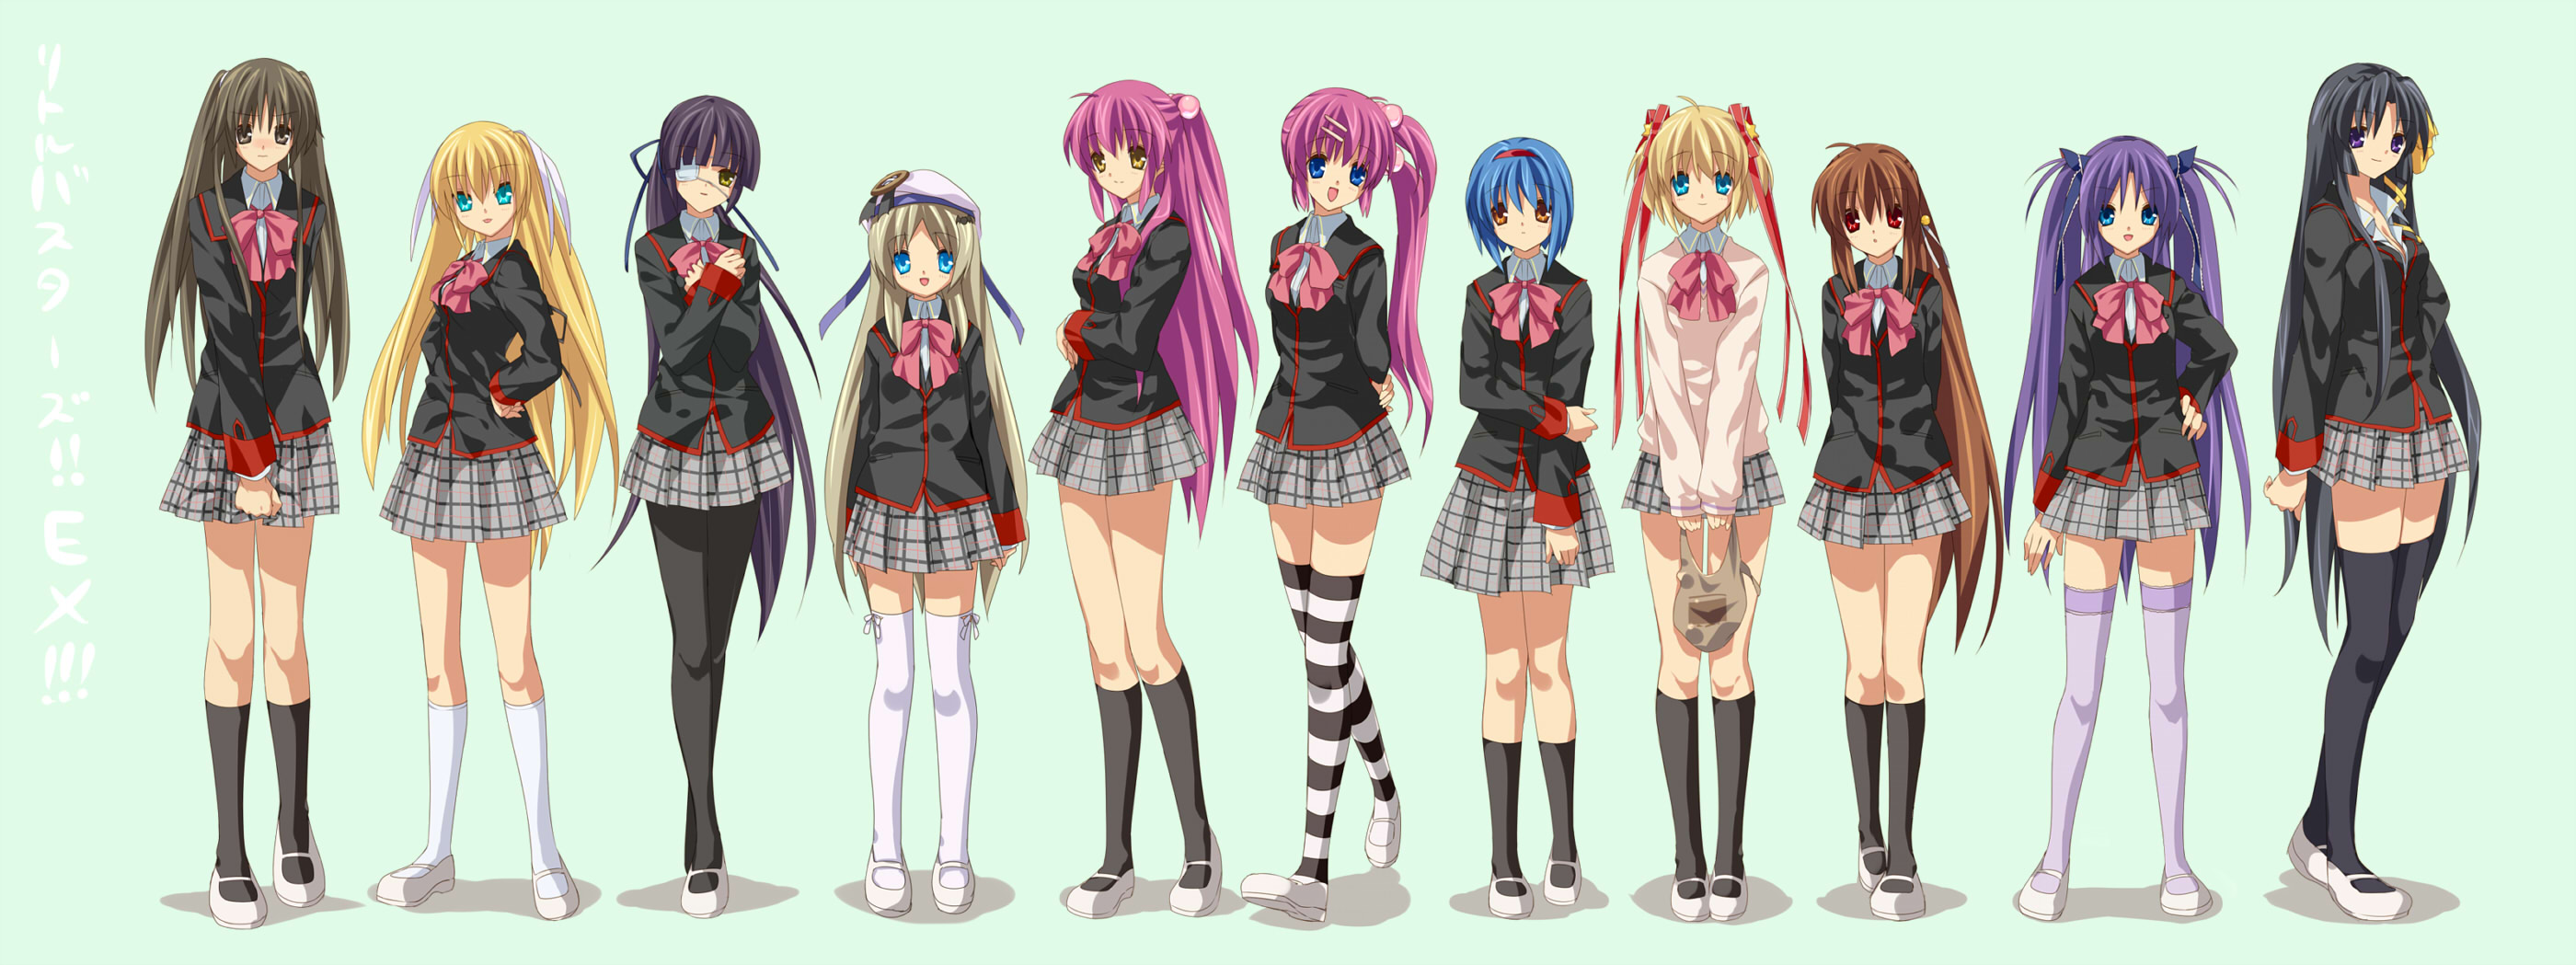 Free download wallpaper Anime, Little Busters! on your PC desktop